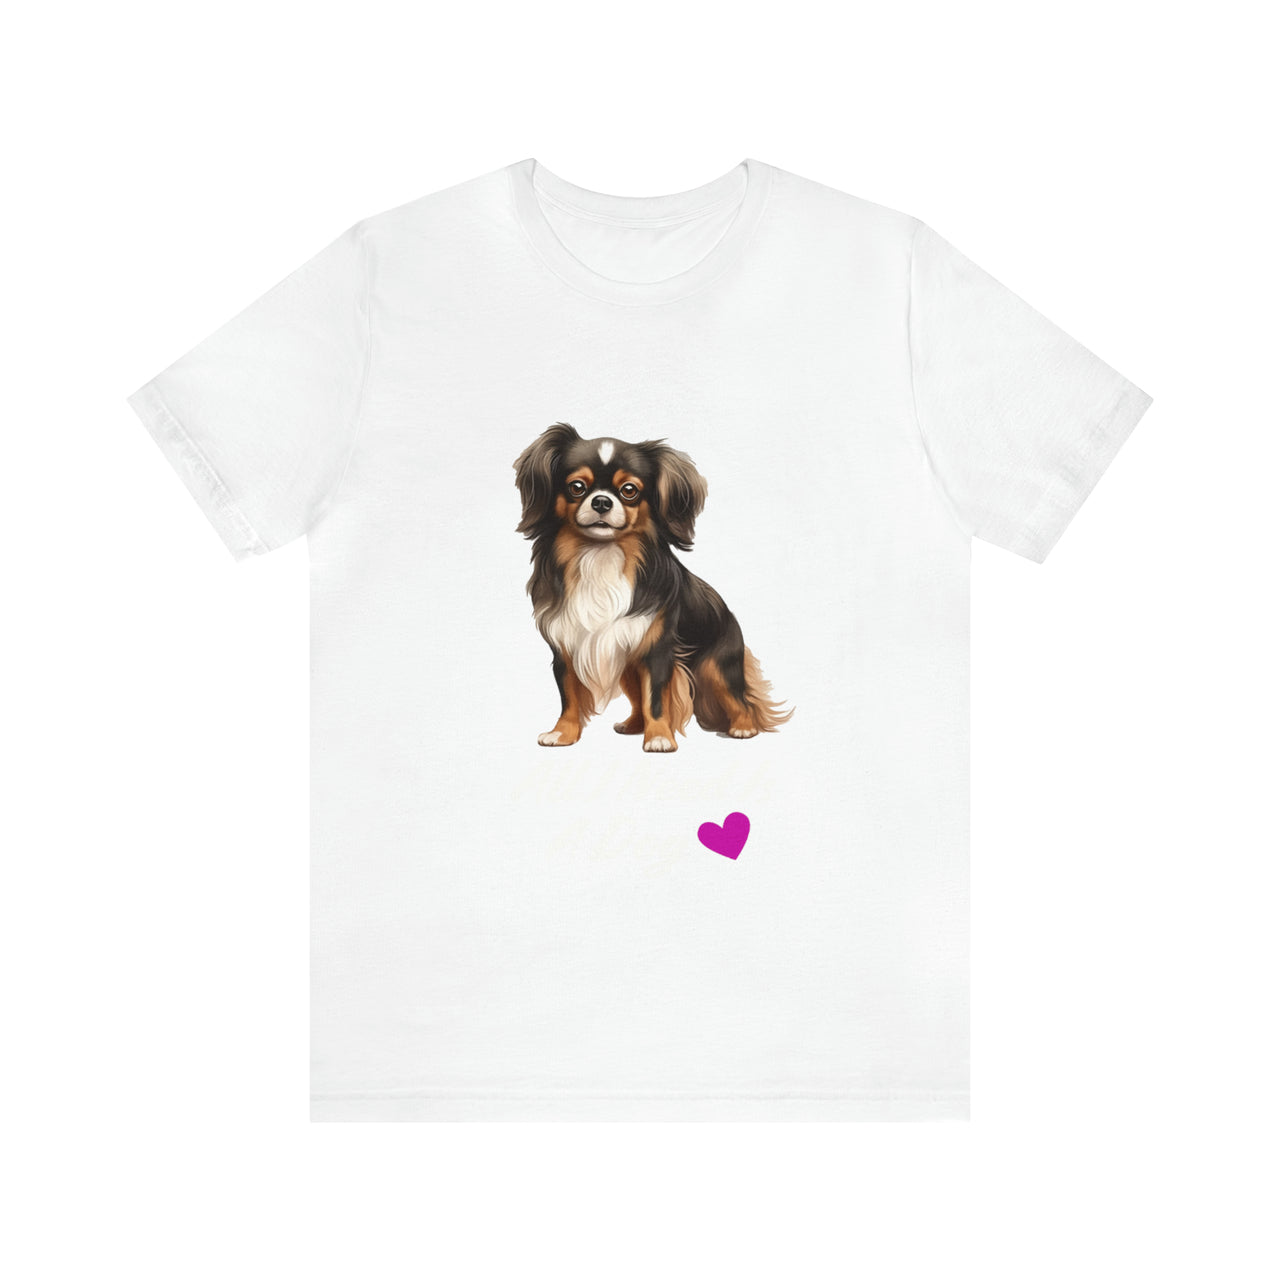 All I Need Is A Dog Unisex Tee